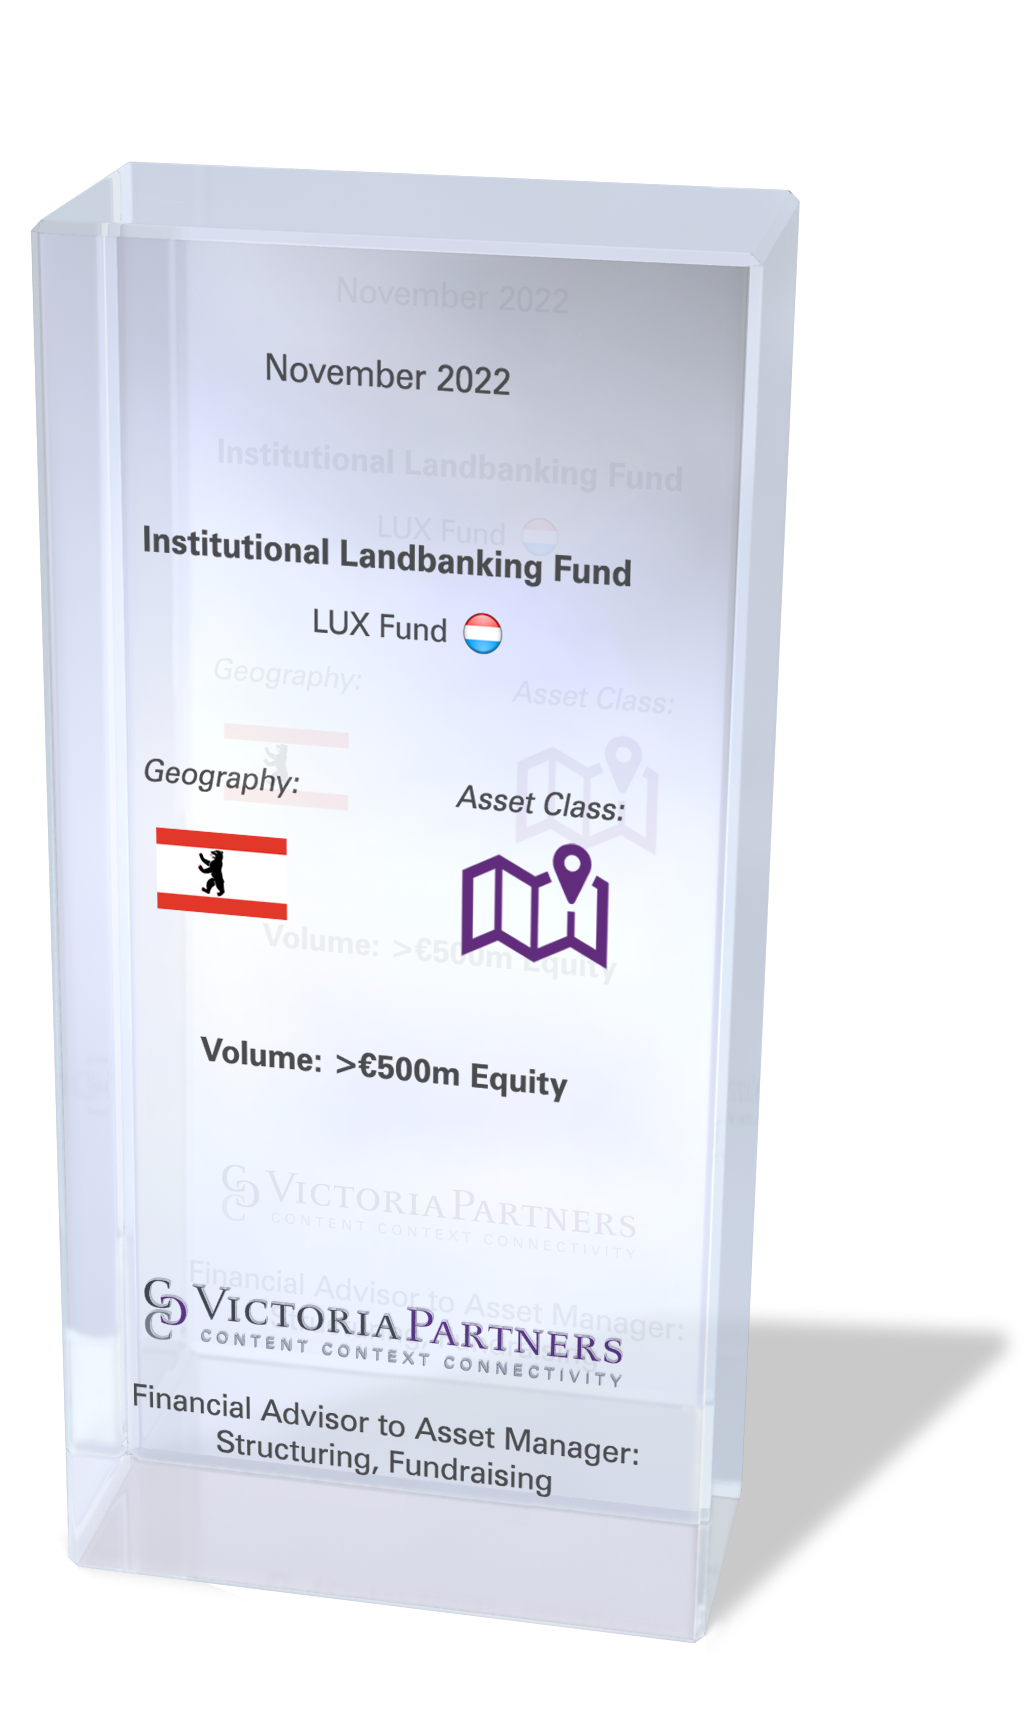 VICTORIAPARTNERS - Financial Advisor to Asset Manager: Structuring, Fundraising in Deutschland- November 2021